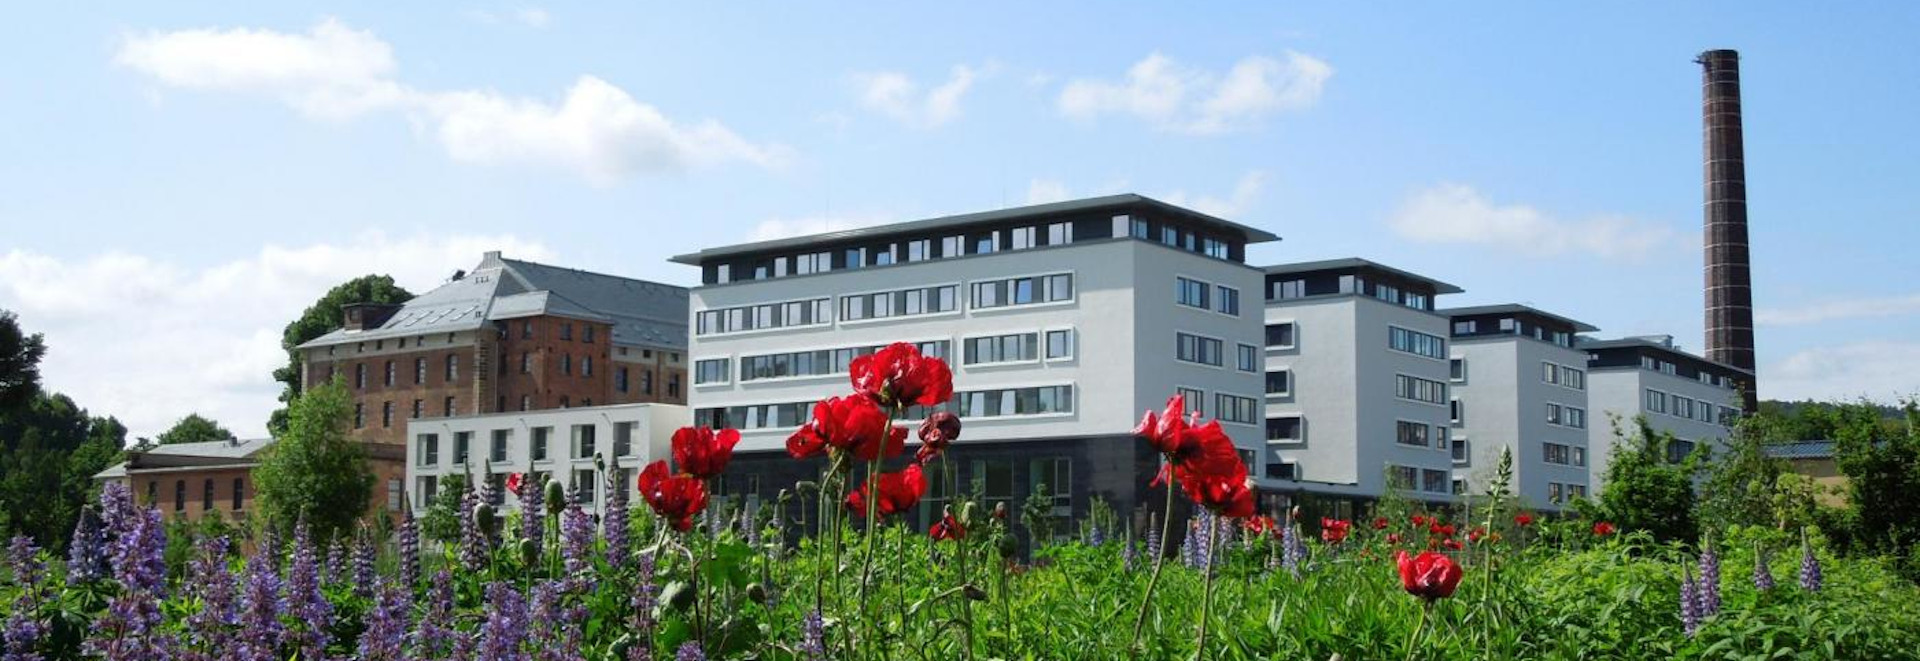 Meadow with poppy flowers, in the background a combination of historical and modern buildings. 